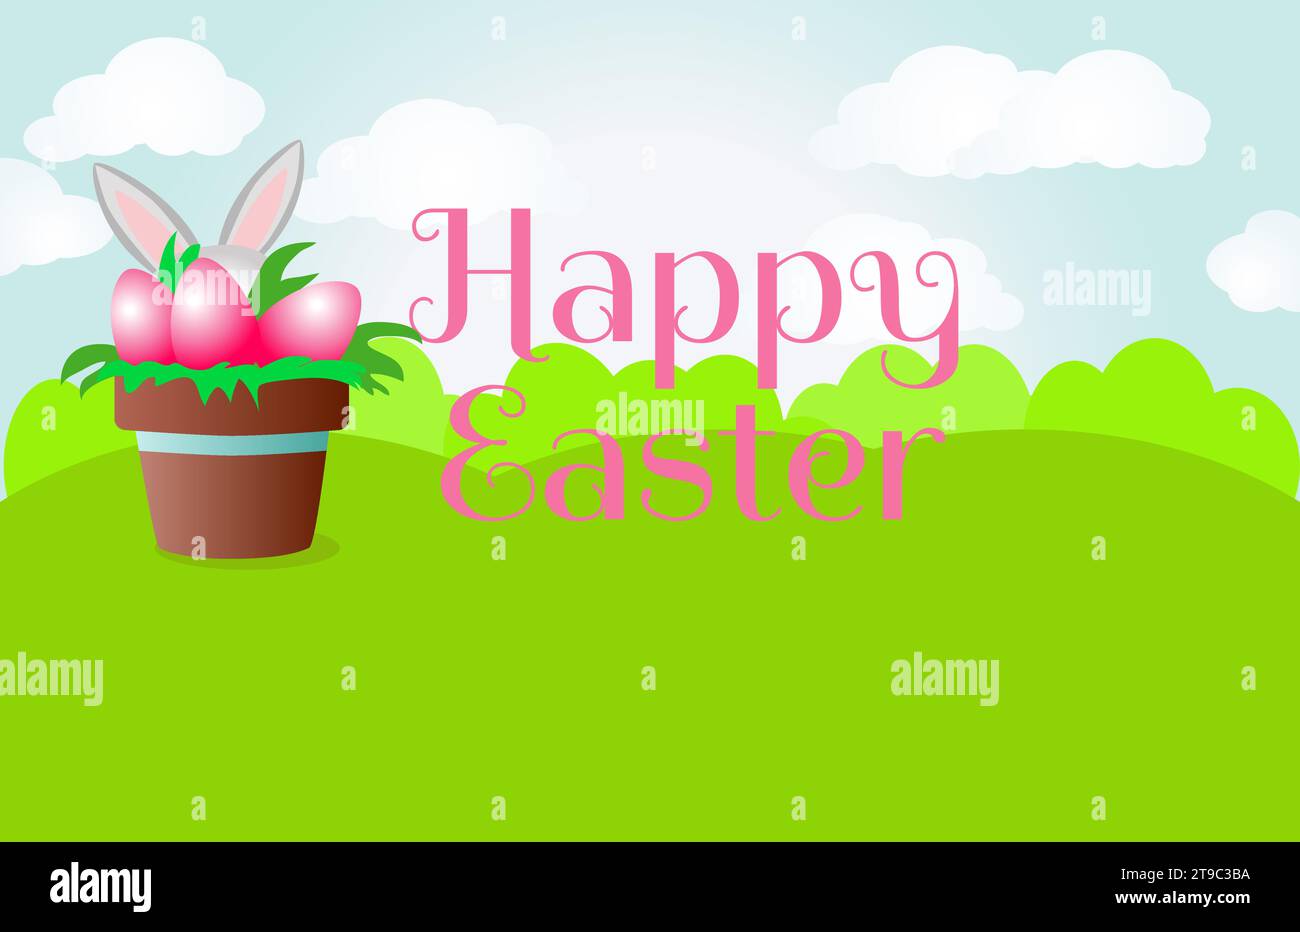 On the green grass is a decorative pot with painted eggs and the text Happy Easter. The ears of the Easter Bunny protrude from the back of the eggs. H Stock Vector